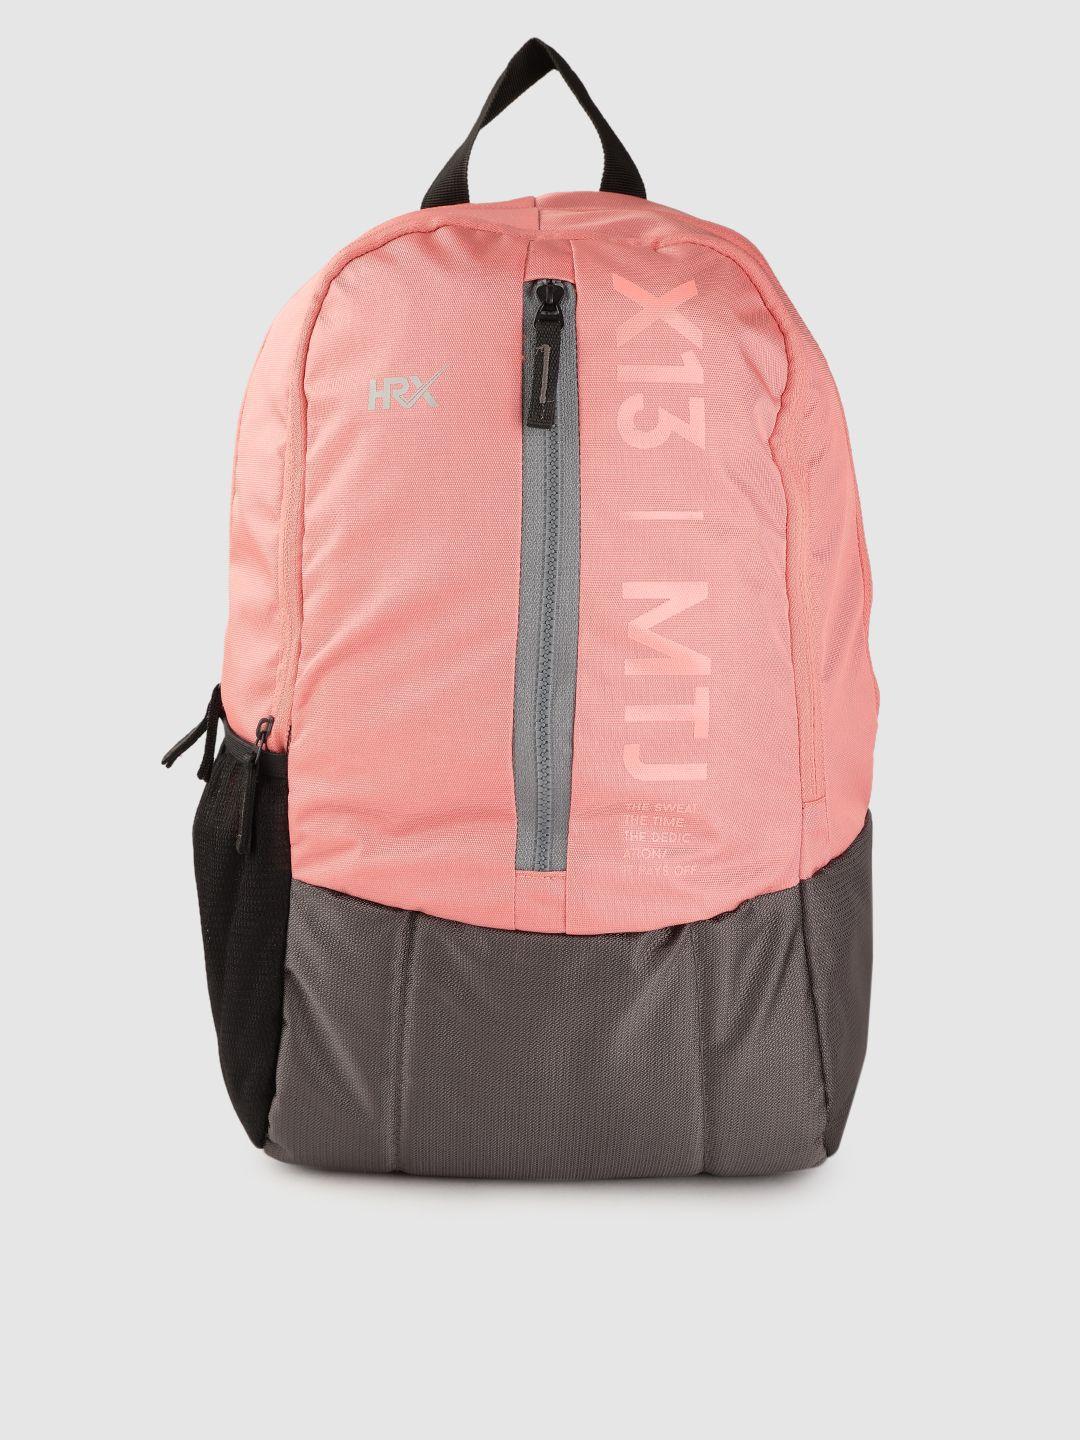 hrx-by-hrithik-roshan-unisex-pink-&-charcoal-grey-colourblocked-16-inch-laptop-backpack